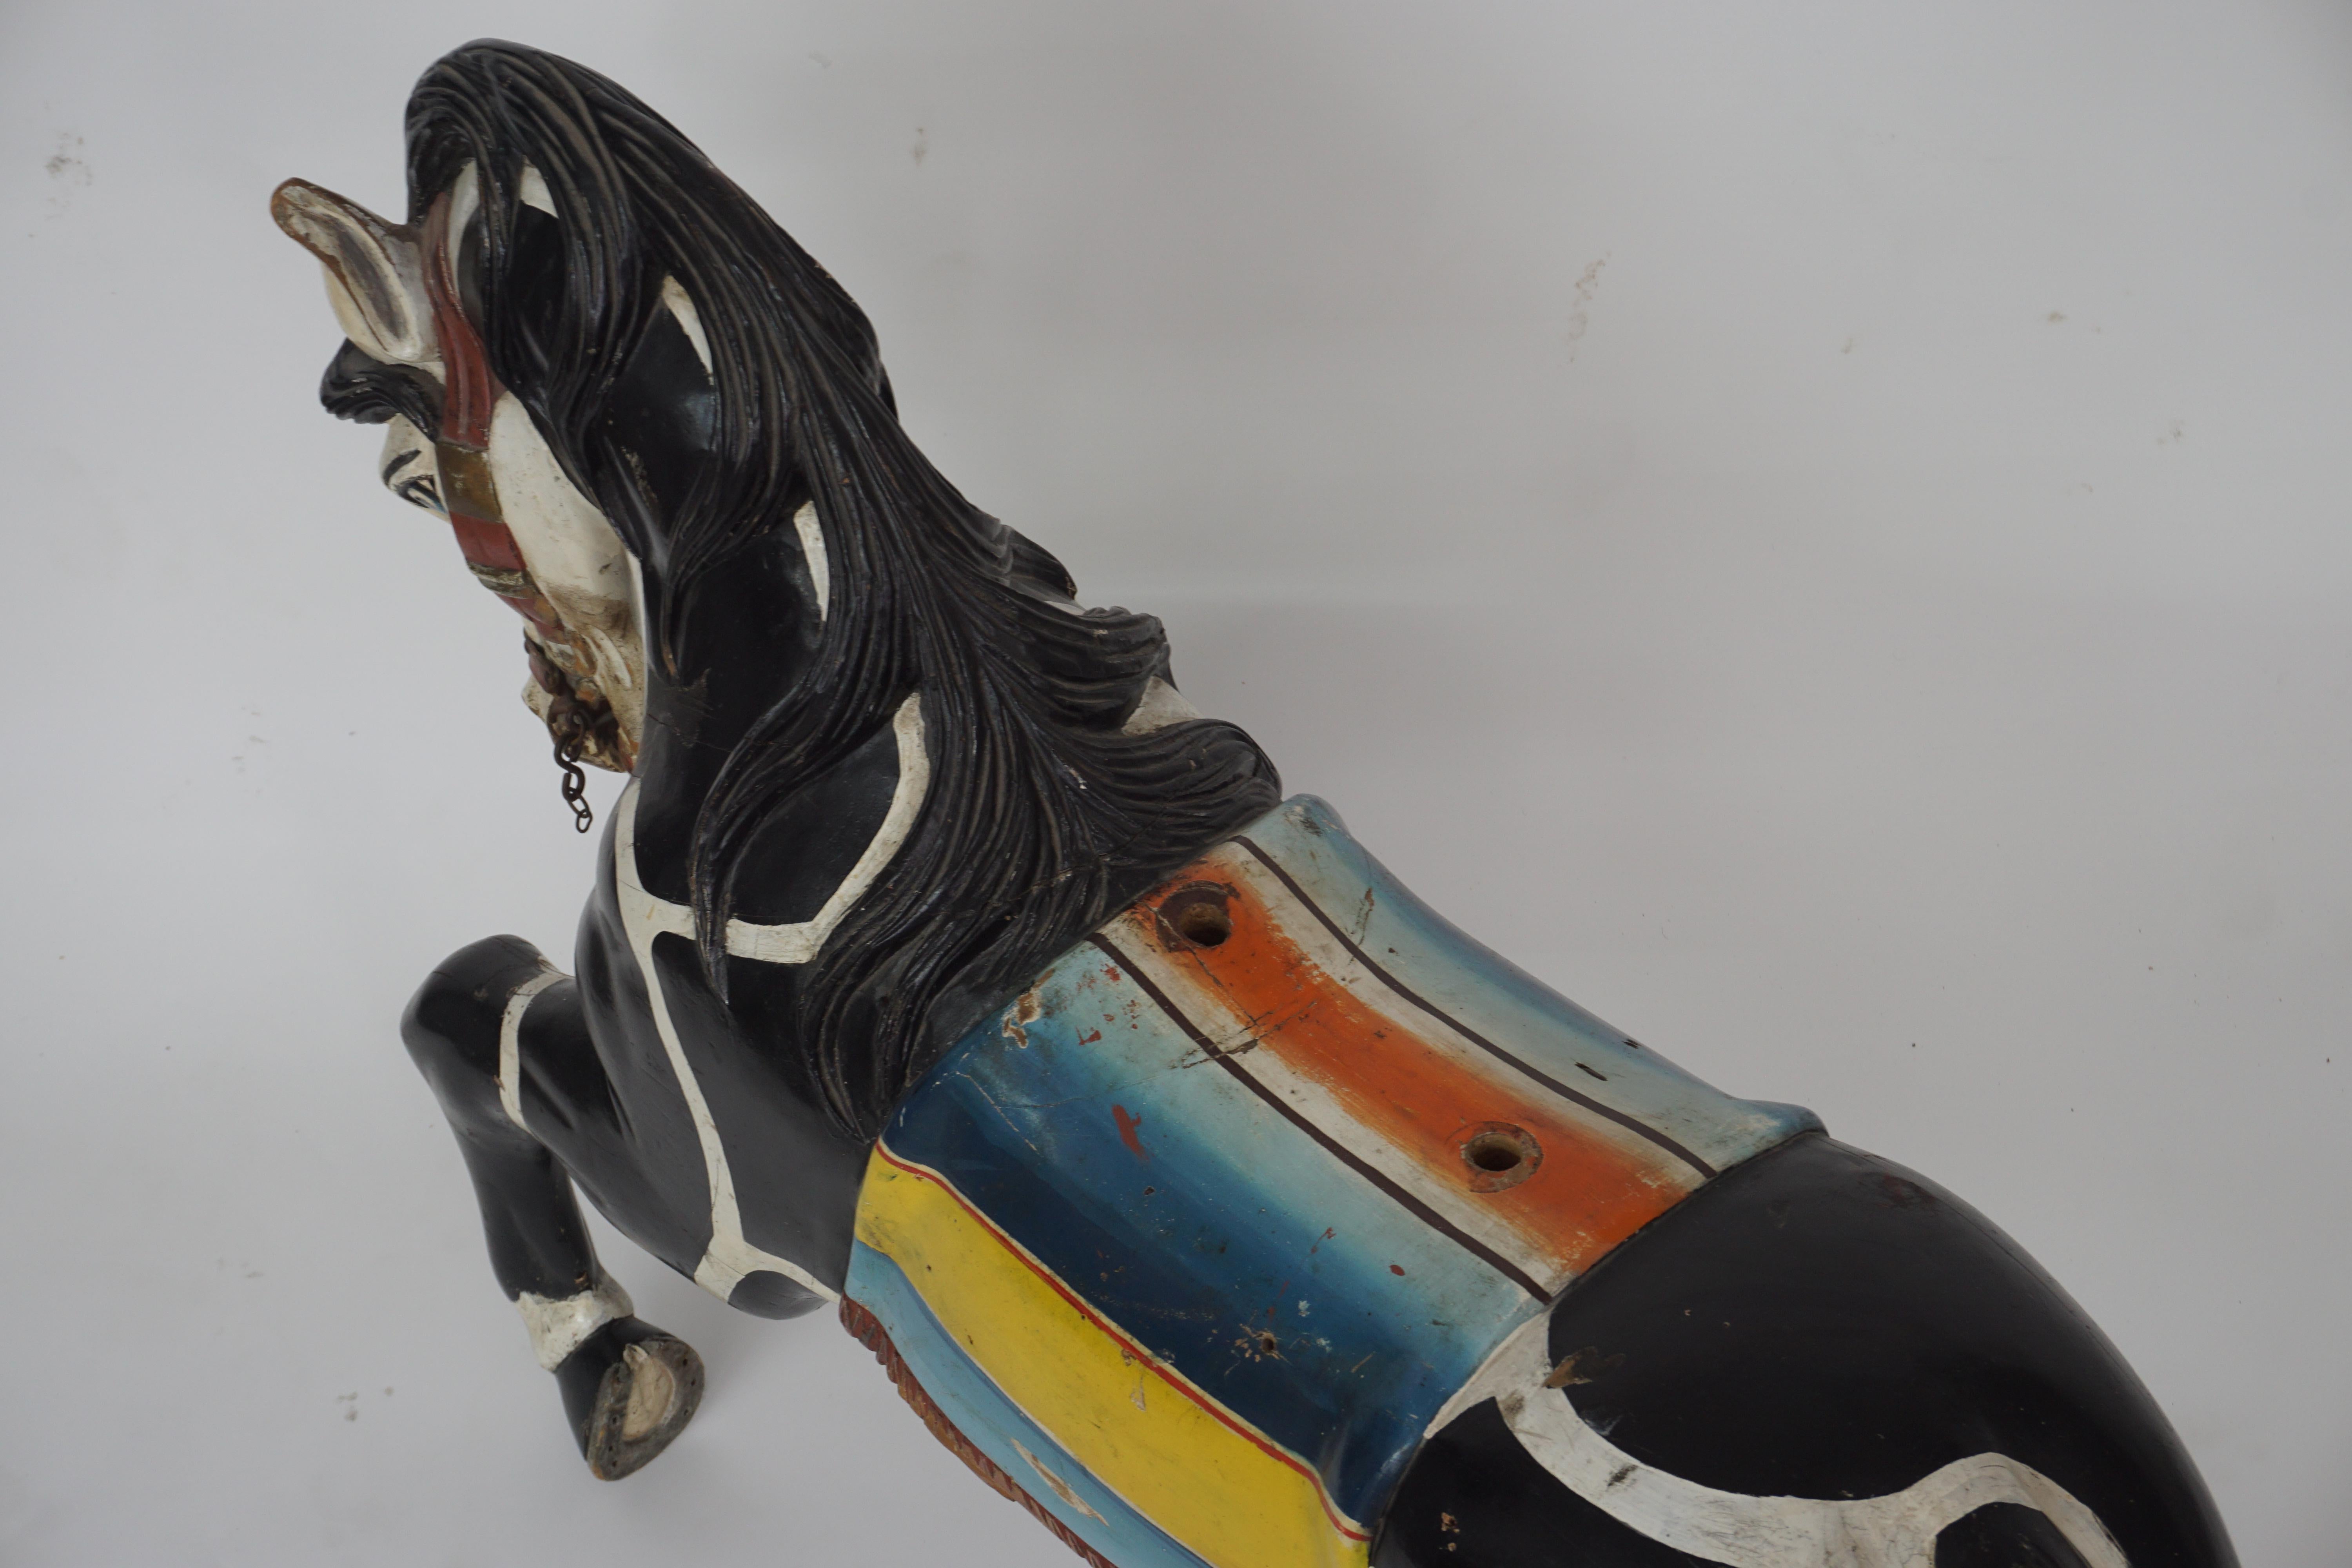 Beautiful Antique carousel horse.
Hand-carved and hand-painted.
Origin possibly Mexico or USA.